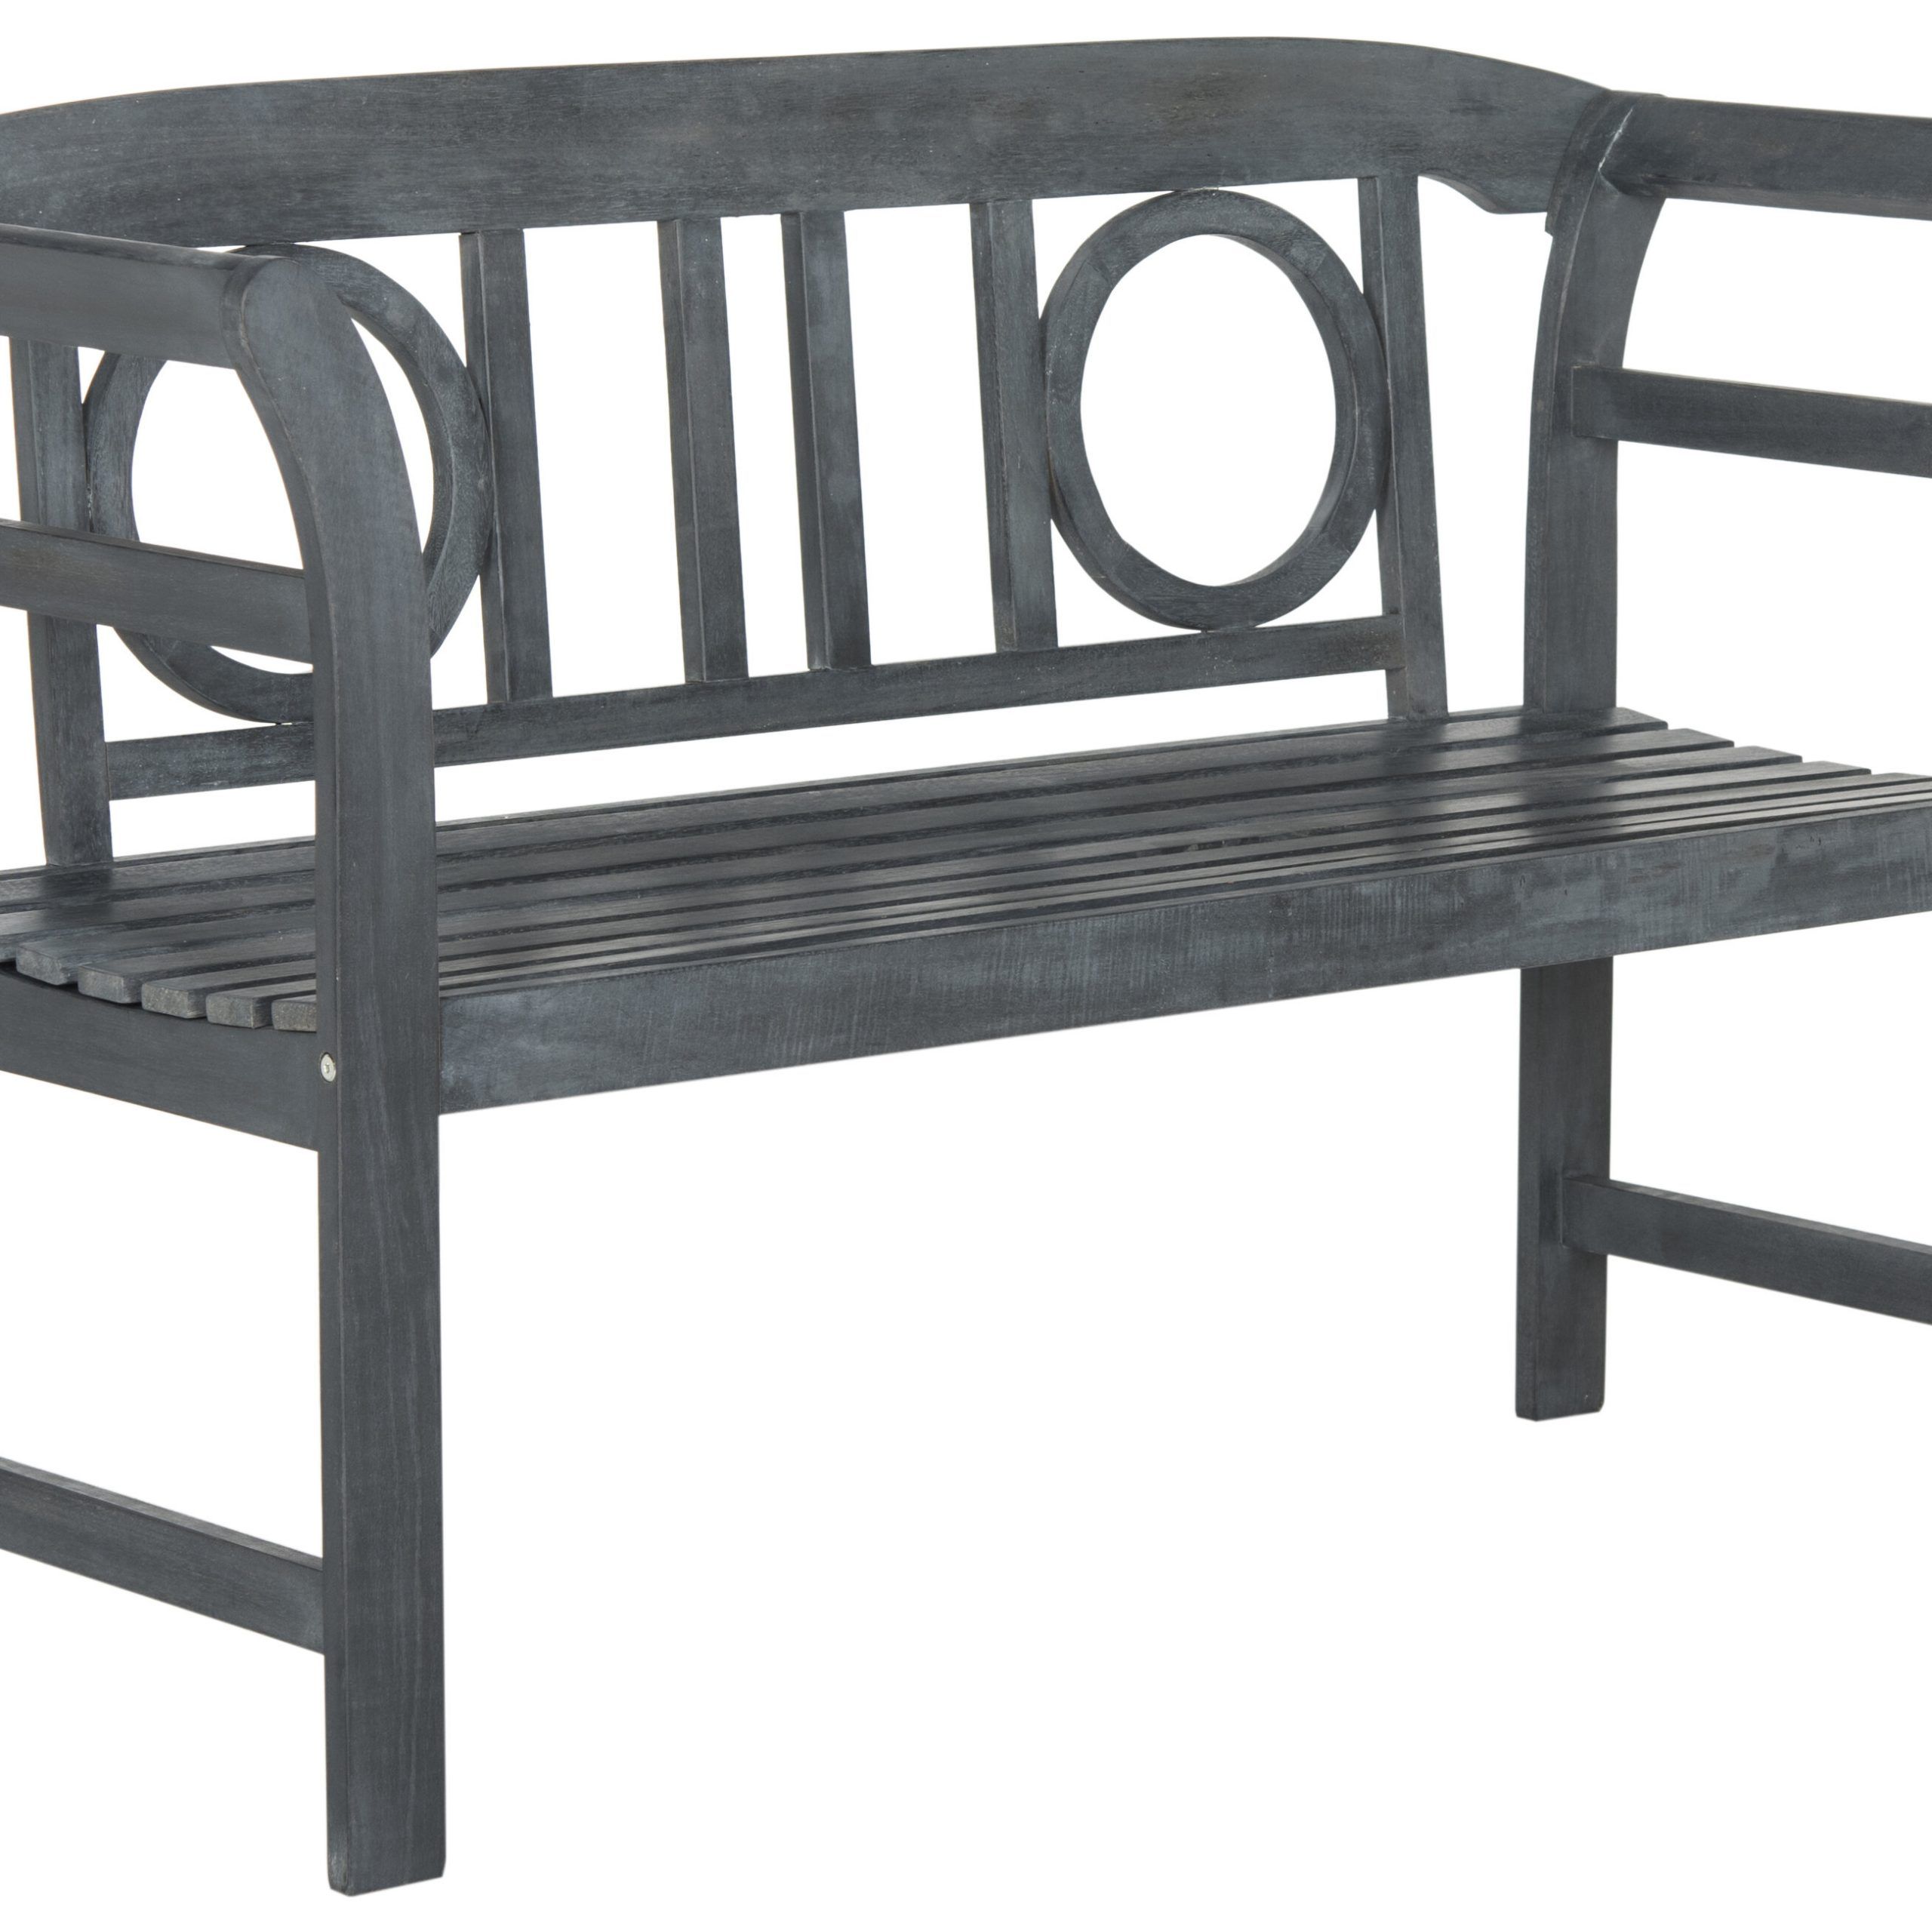 Brinwood 2 Seat Wooden Garden Bench With Gehlert Traditional Patio Iron Garden Benches (View 10 of 25)